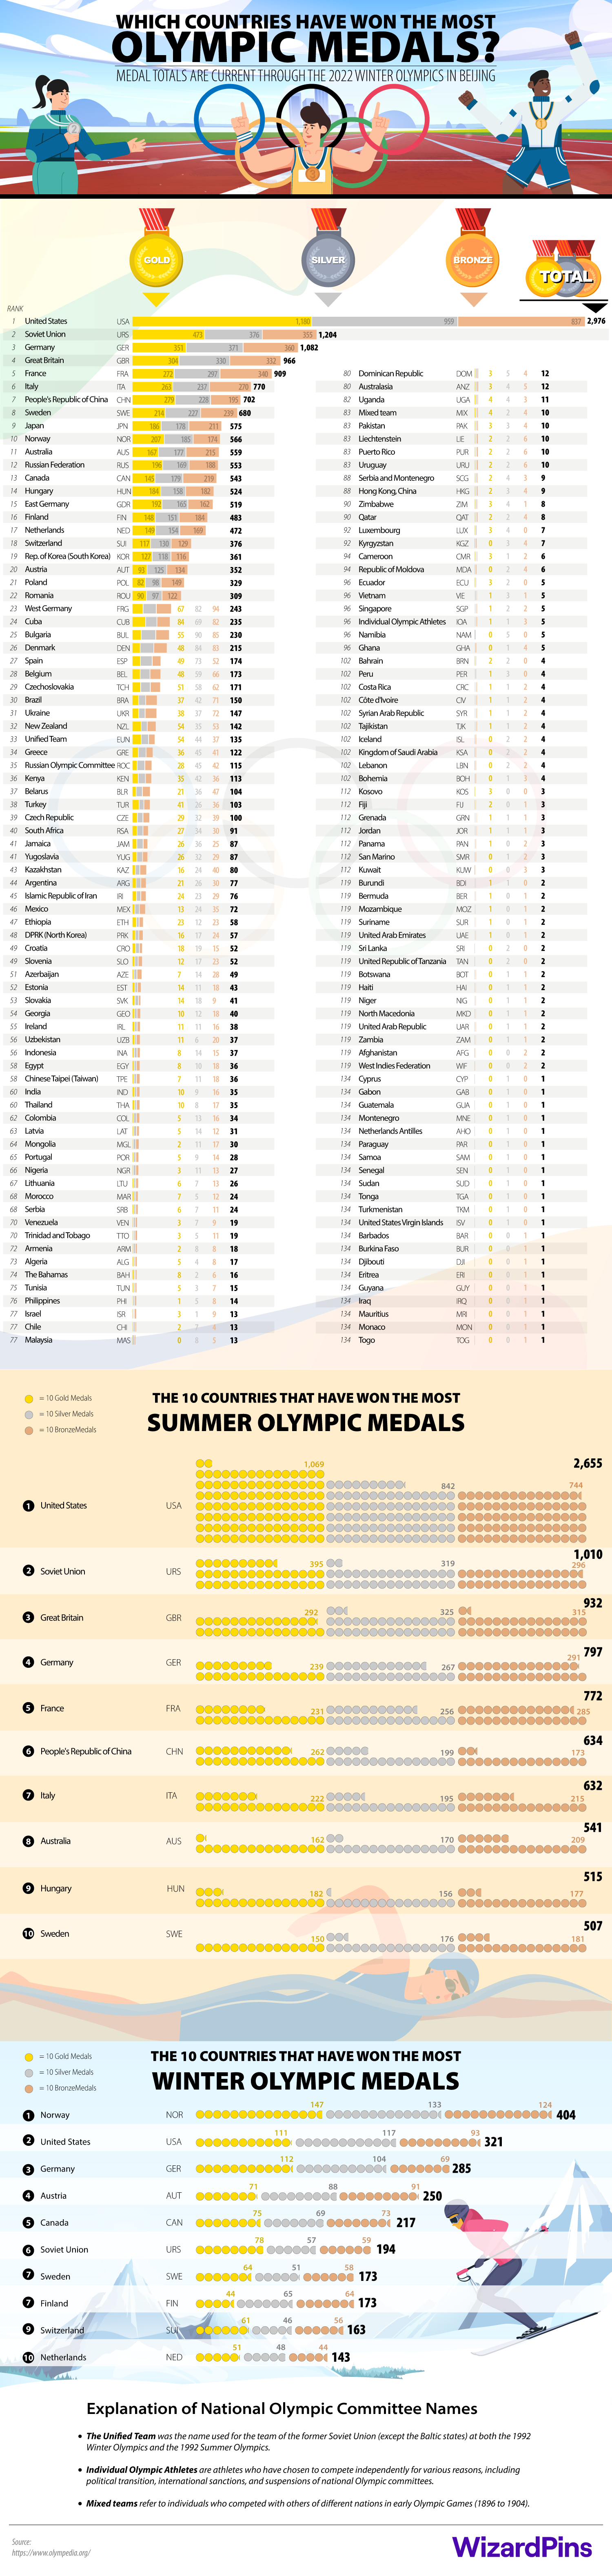 olympic-medal-count-chartistry